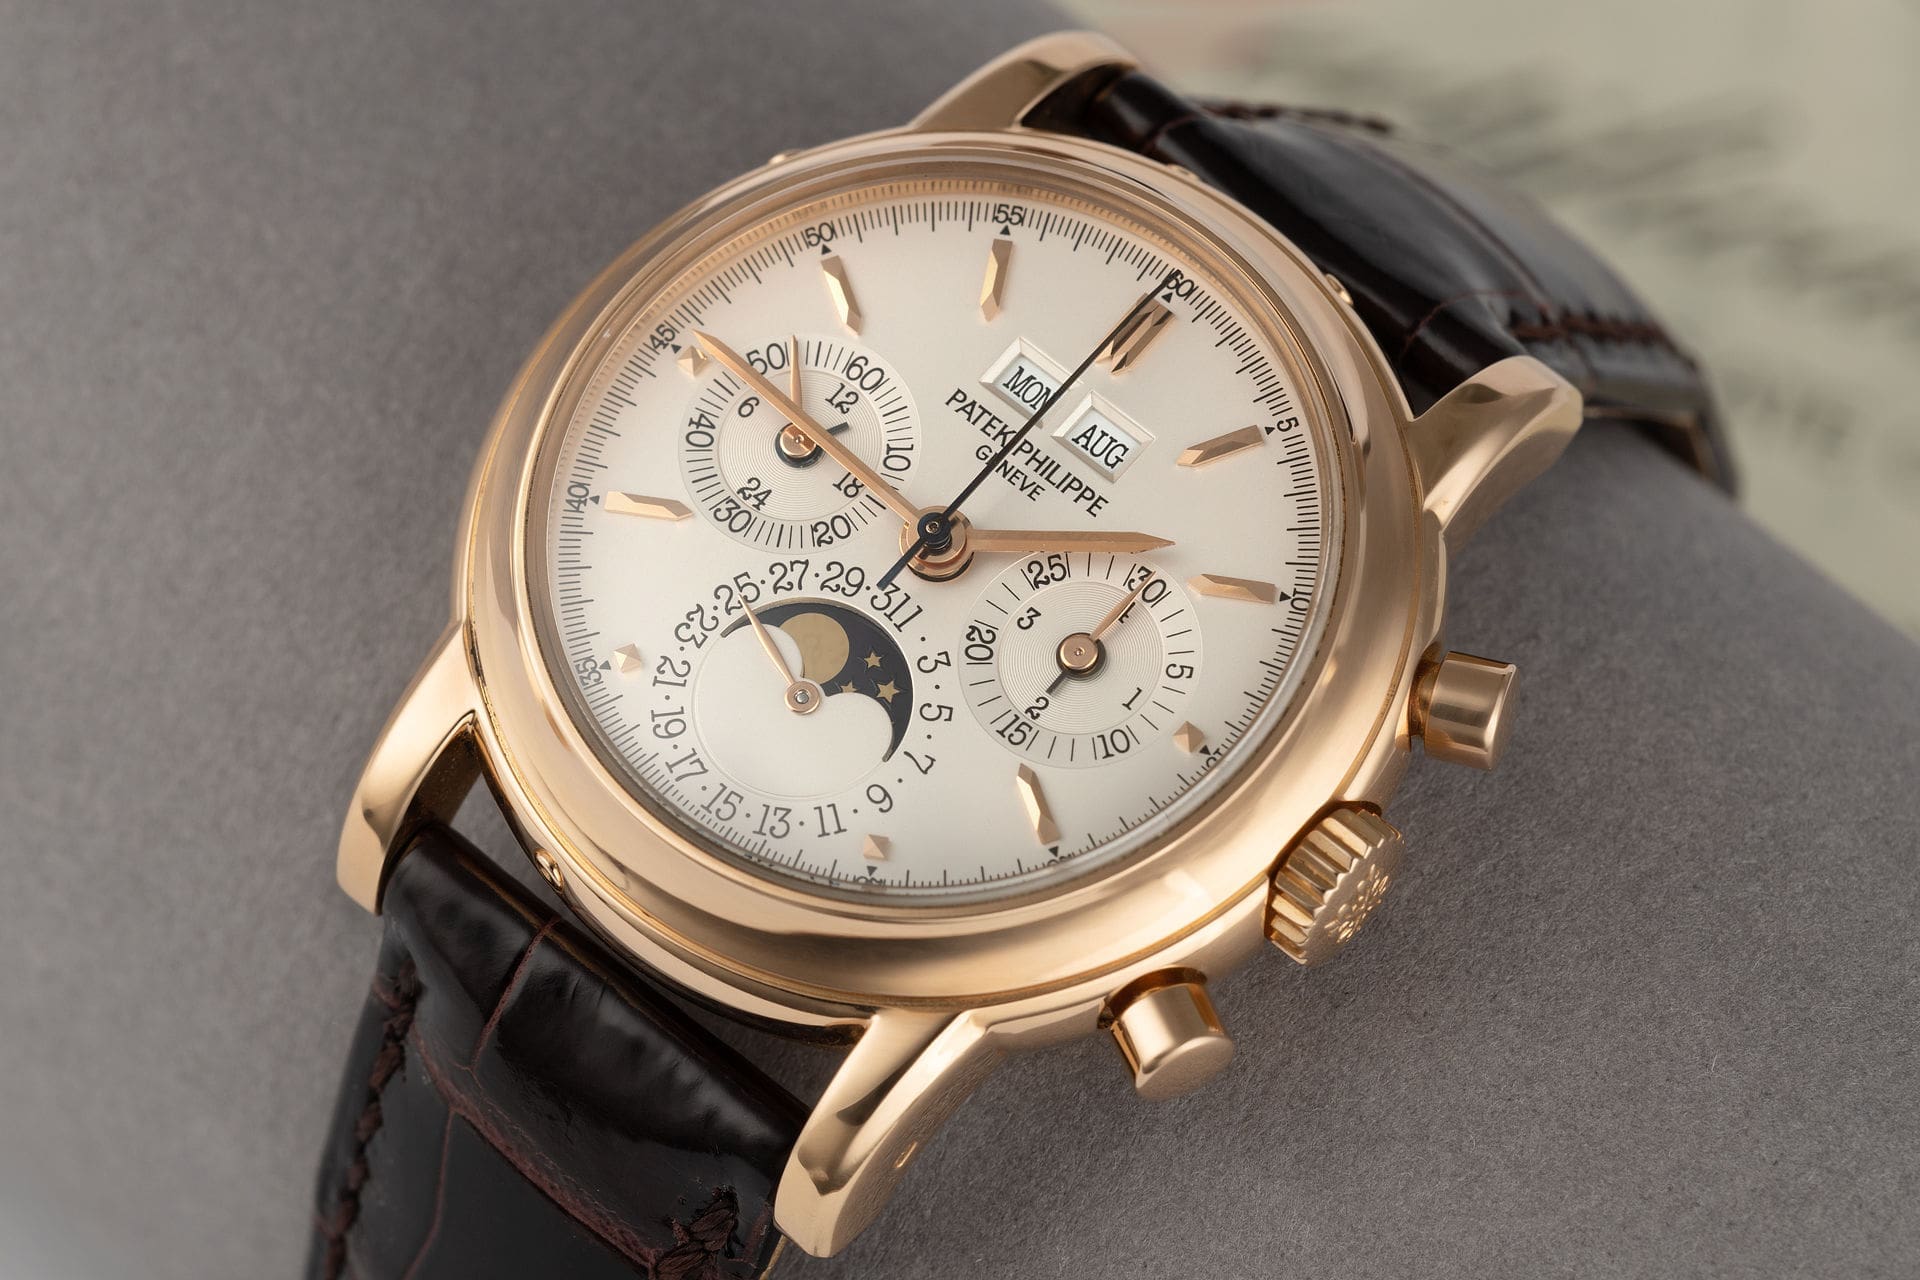 The most important aspect of a watch | OPINION